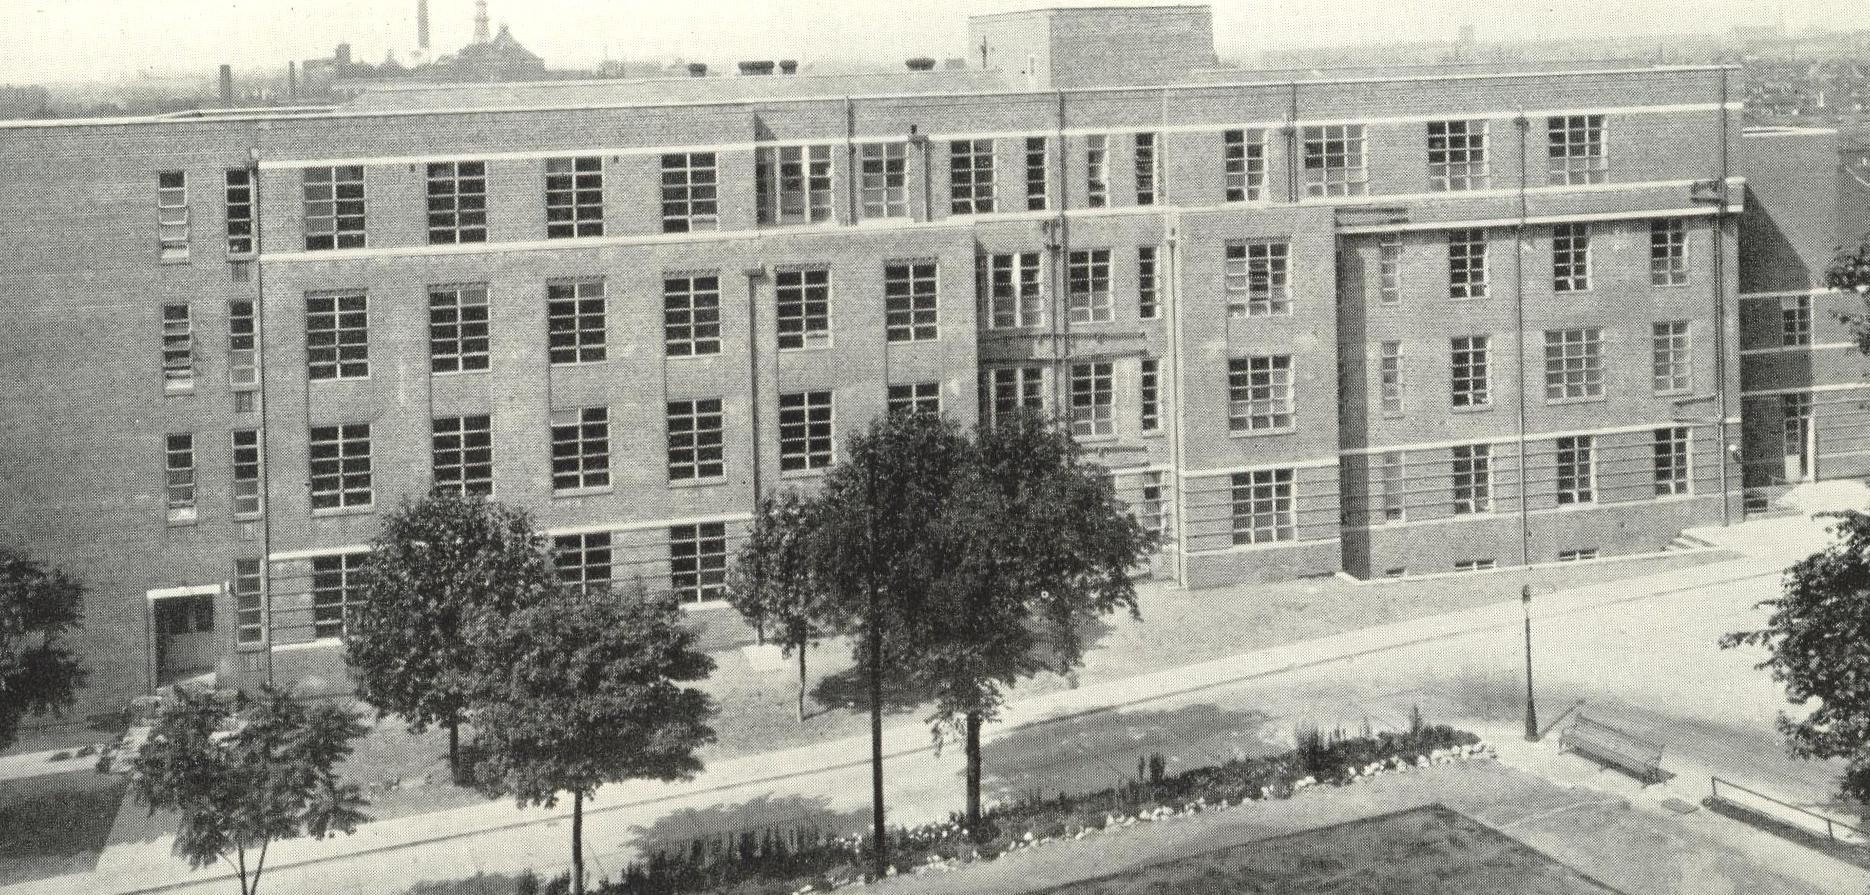 Picture of Mile End Hospital from 1930s